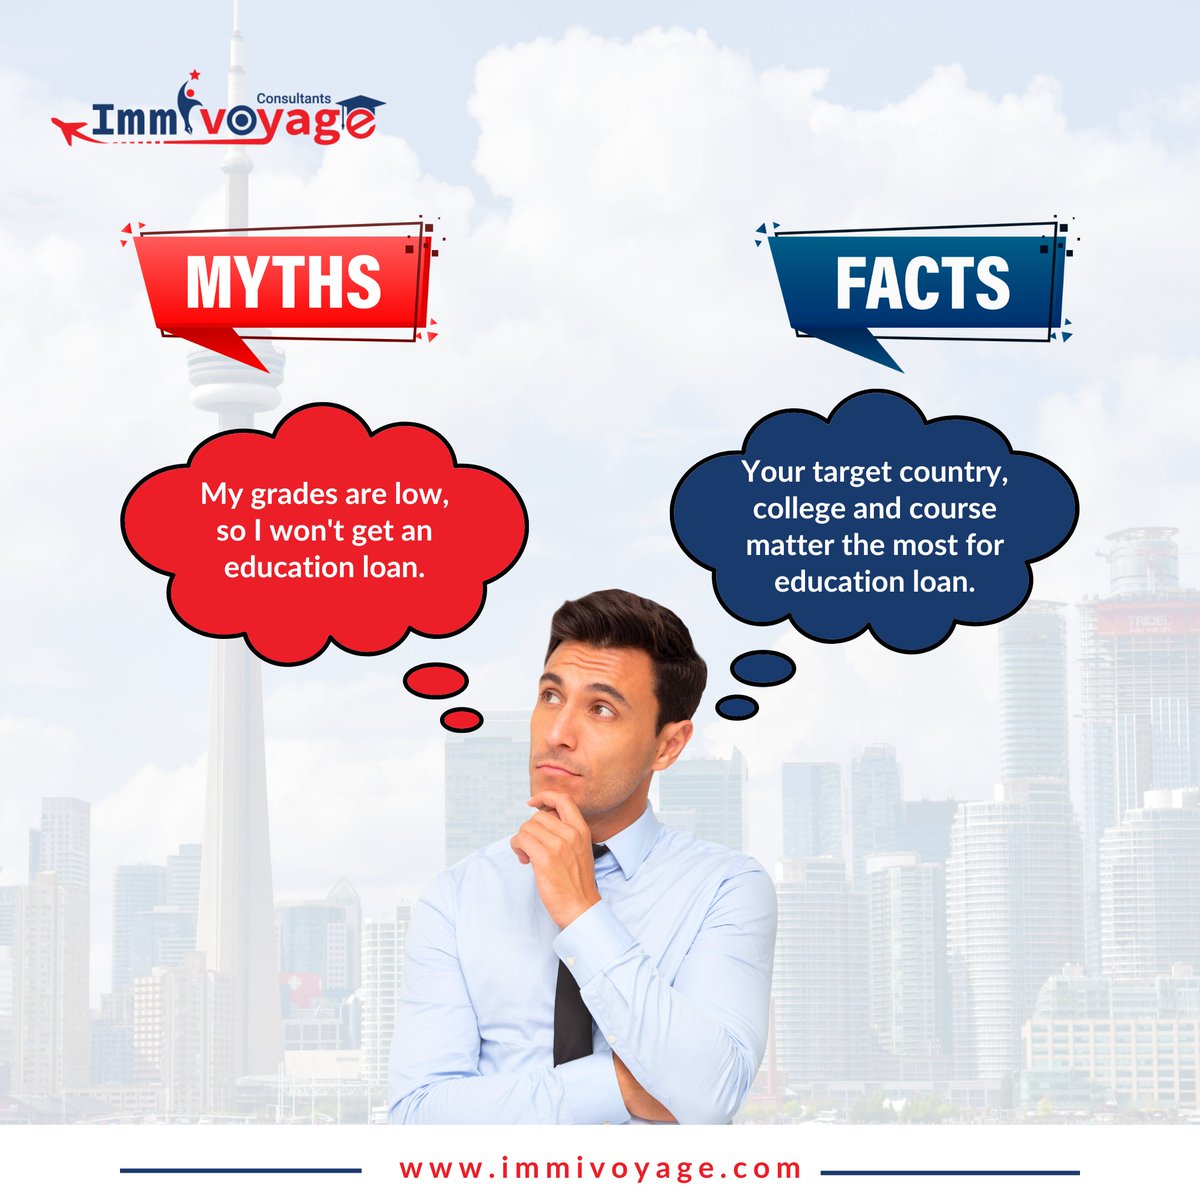 Don't let myths hold you back! Education loans consider more than just grades. 

Explore the right country, college, and course for your dreams. 🧐

#EducationFinance #MythVsFact #immivoyage #studyvisa #canadastudyvisaexpert #immigrationservices #visaexpert